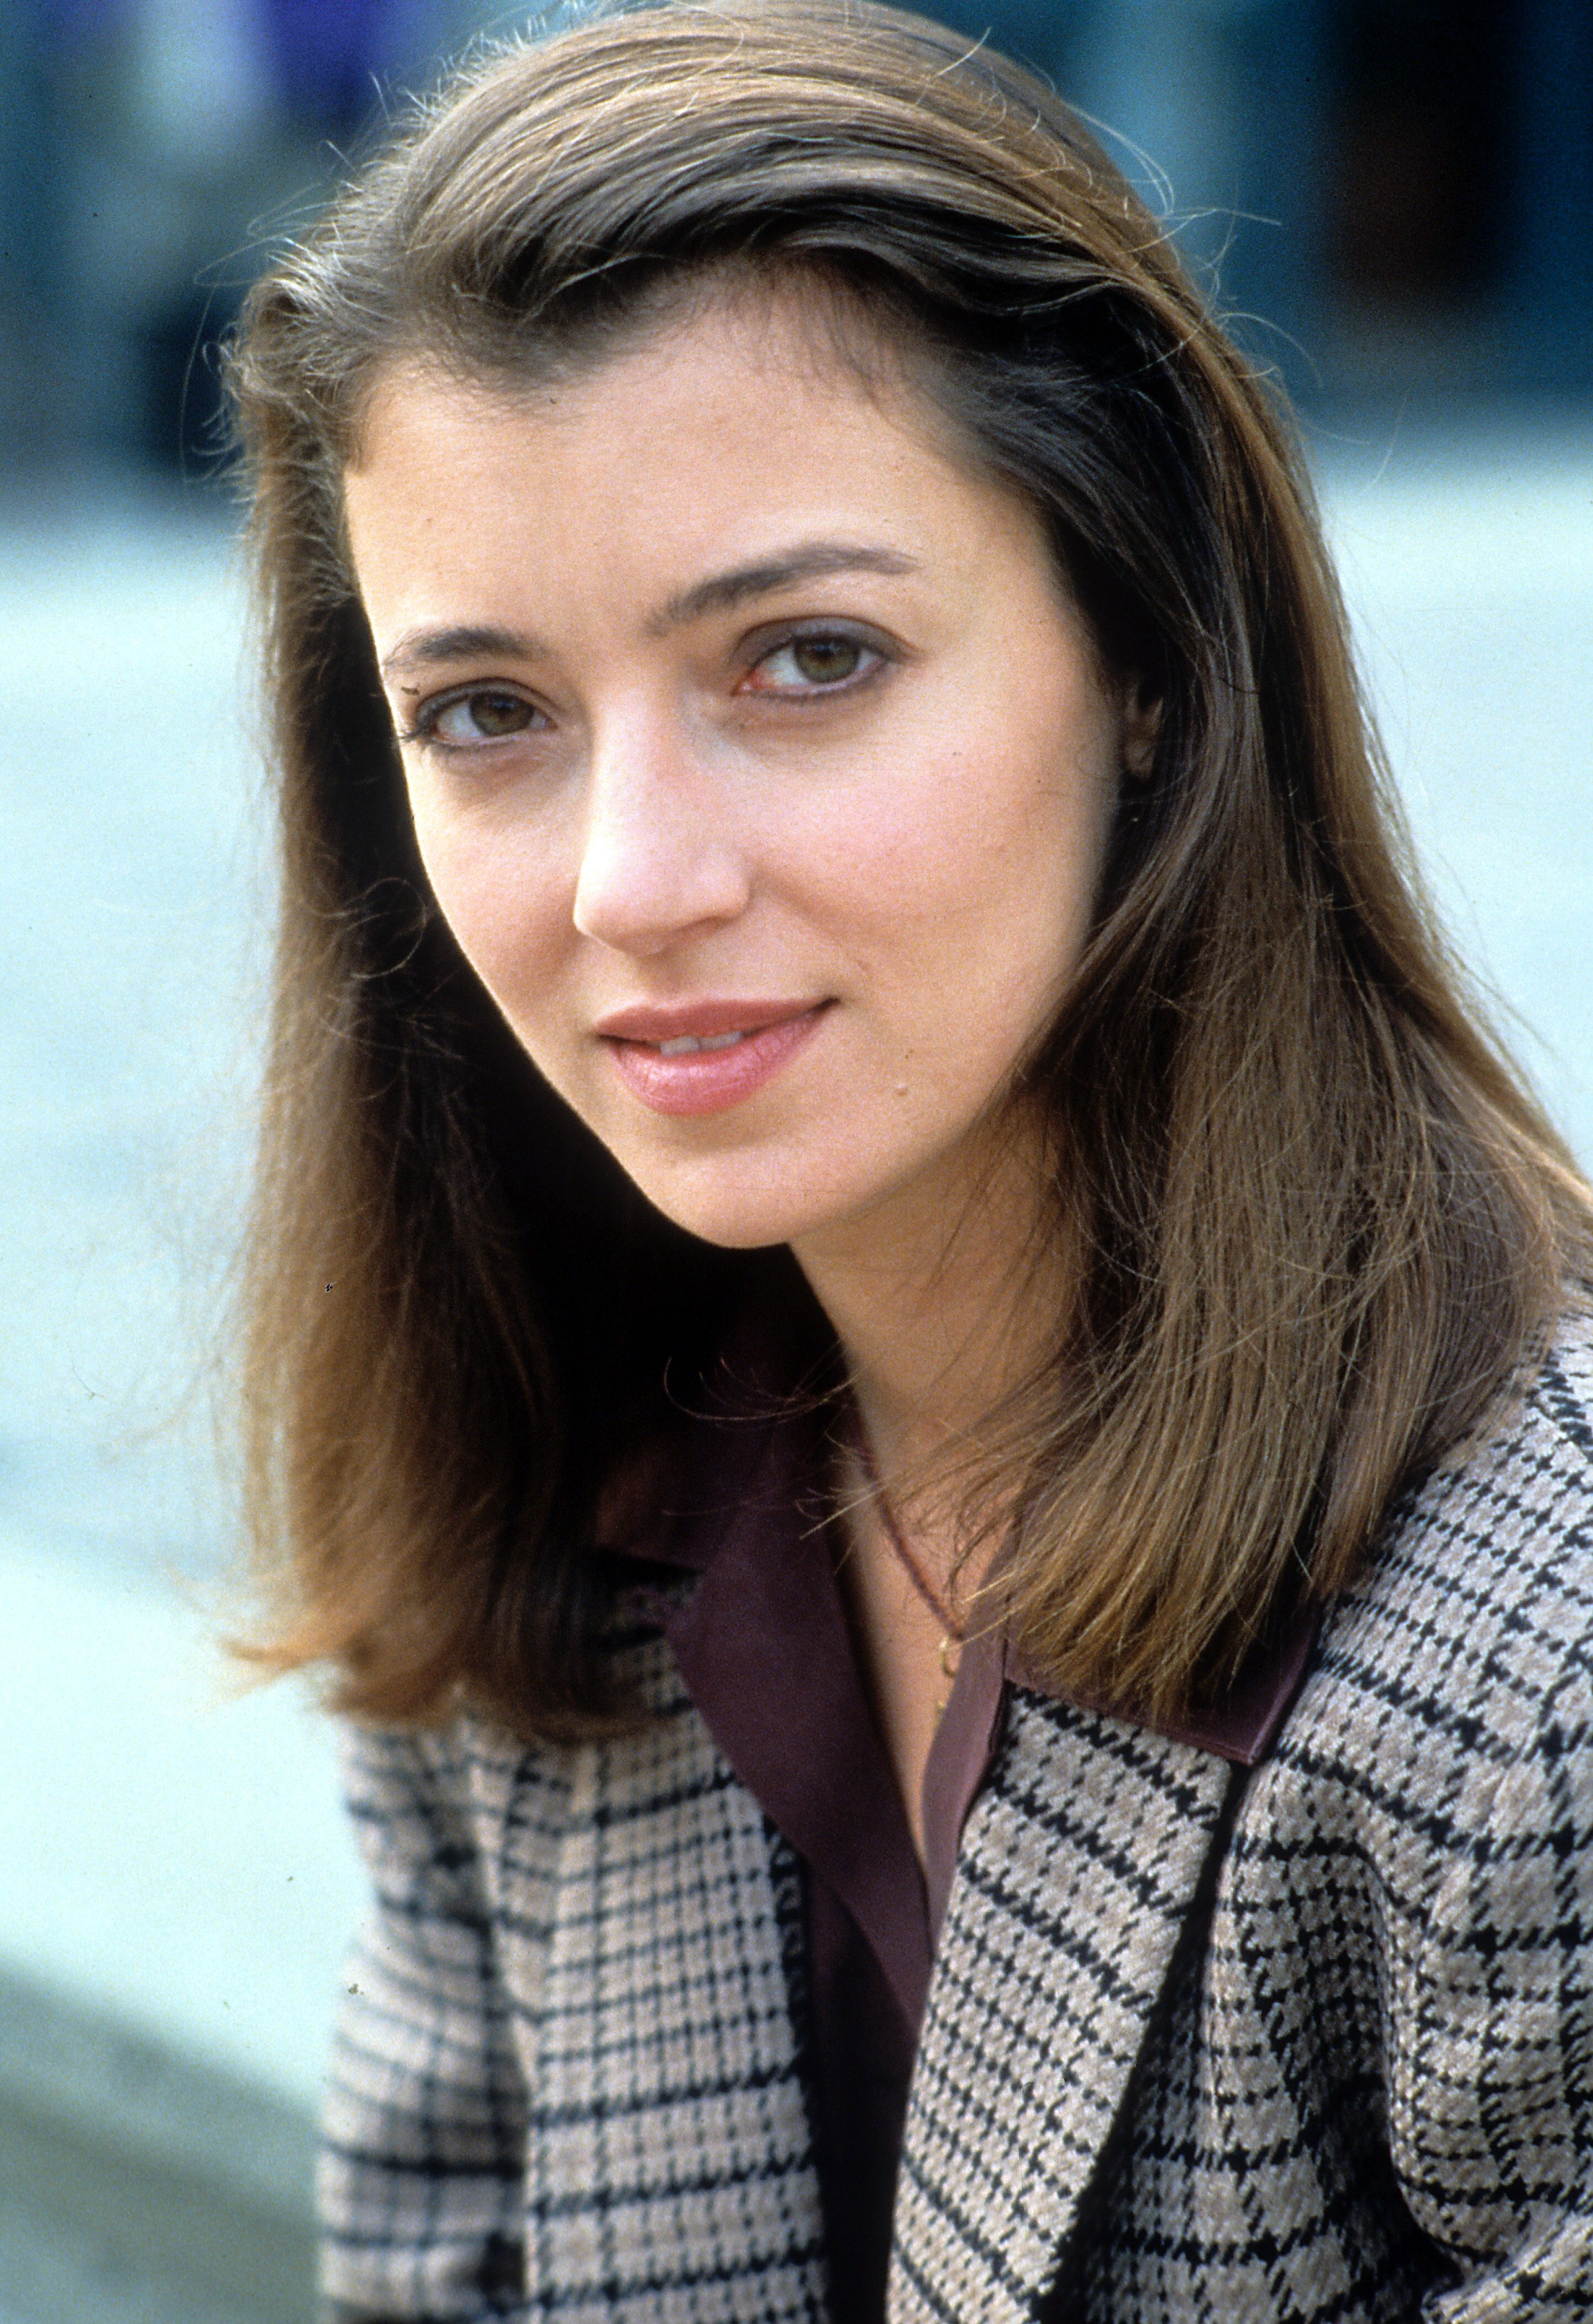 Actress Mia Sara starring in a scene from the film 'Timecop', circa 1994. | Source: Getty Images